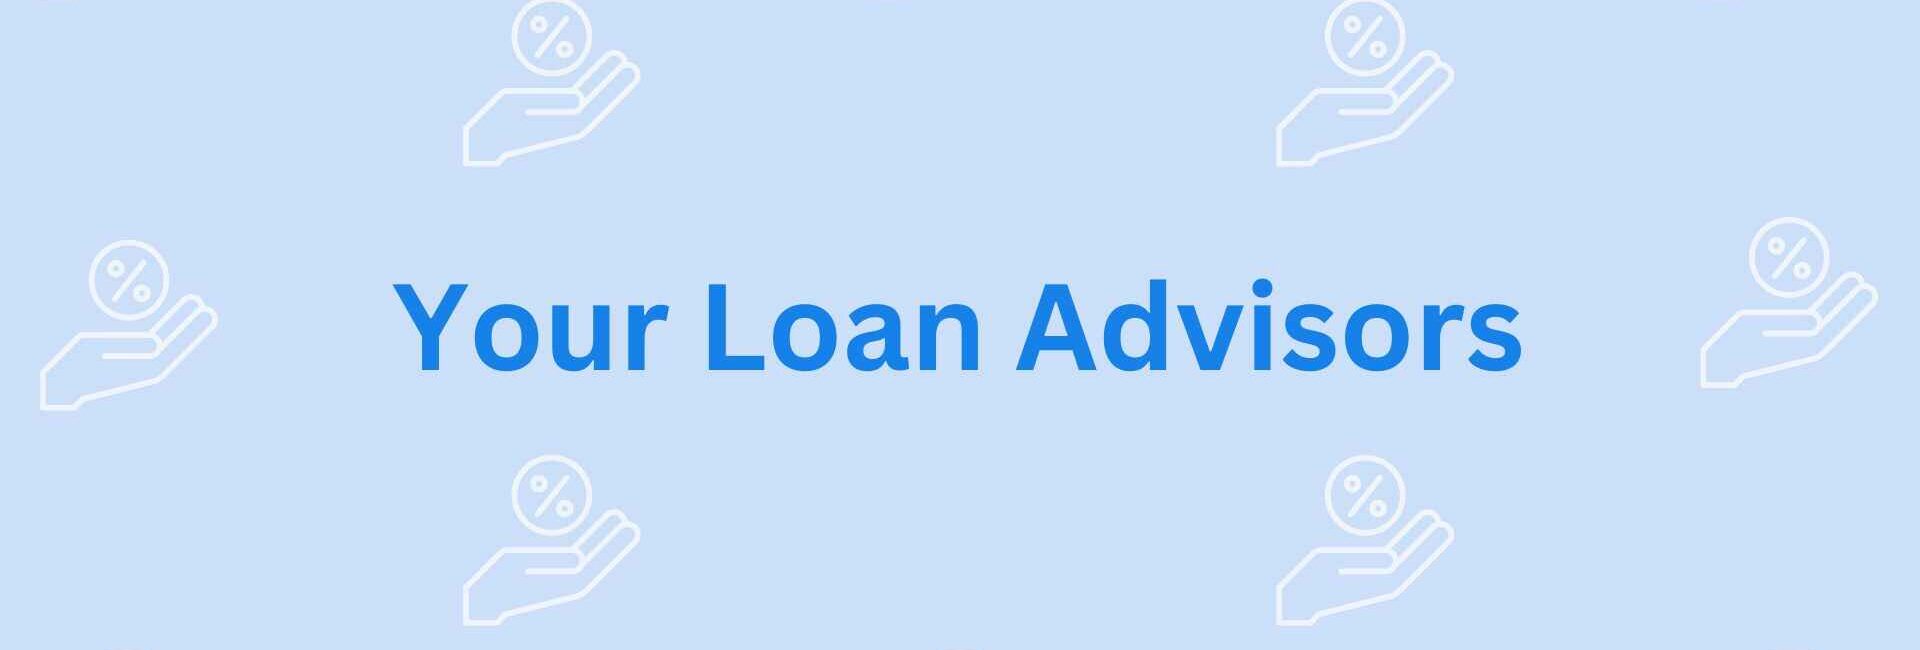 Your Loan Advisors Home loan experts in Noida